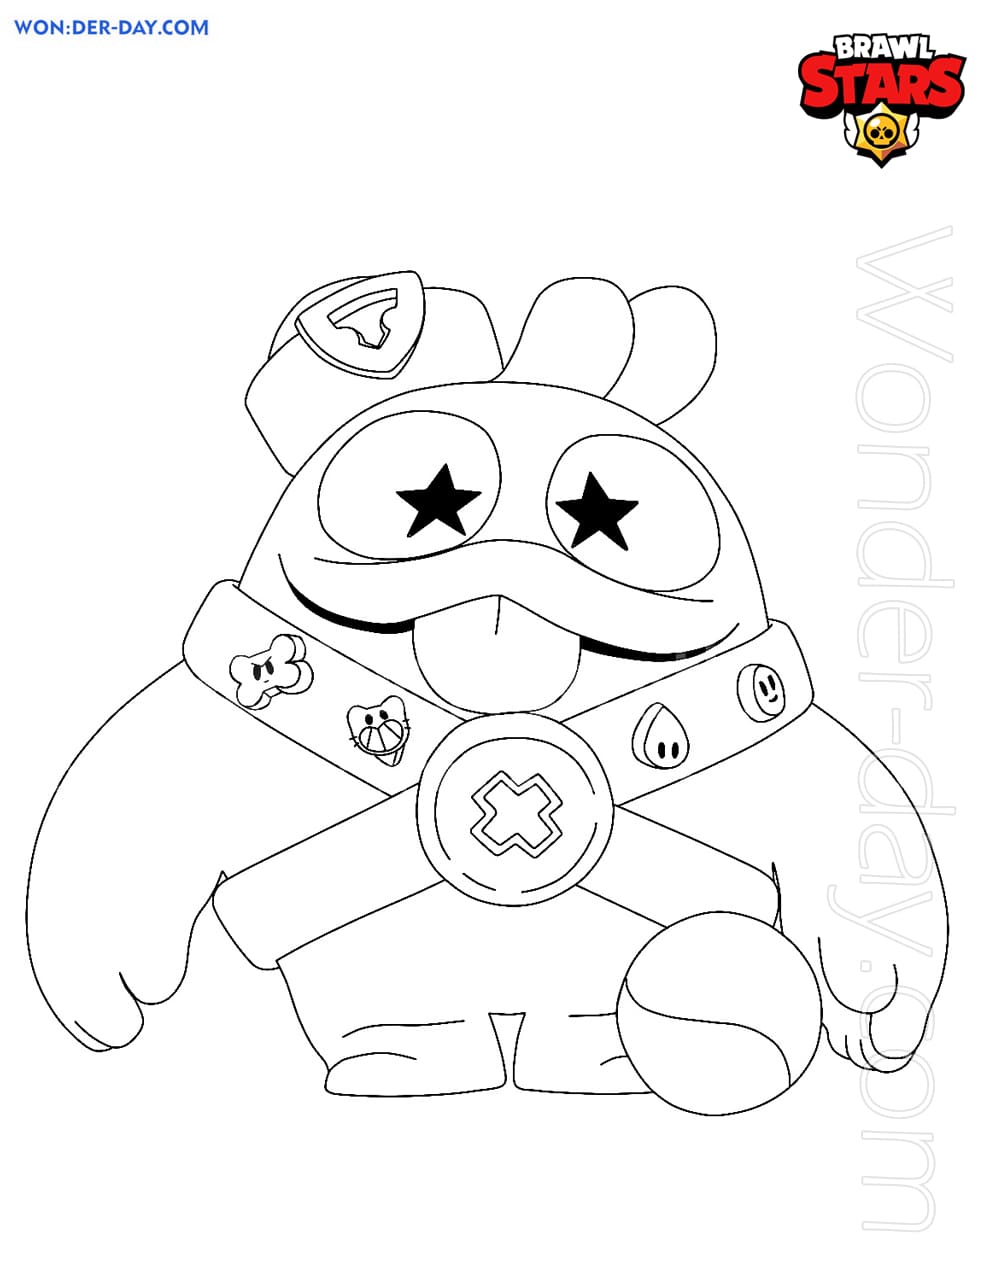 Squeak Brawl Stars Coloring Pages Wonder Day Coloring Pages For Children And Adults - dessin brawl stars squeak a imprimer